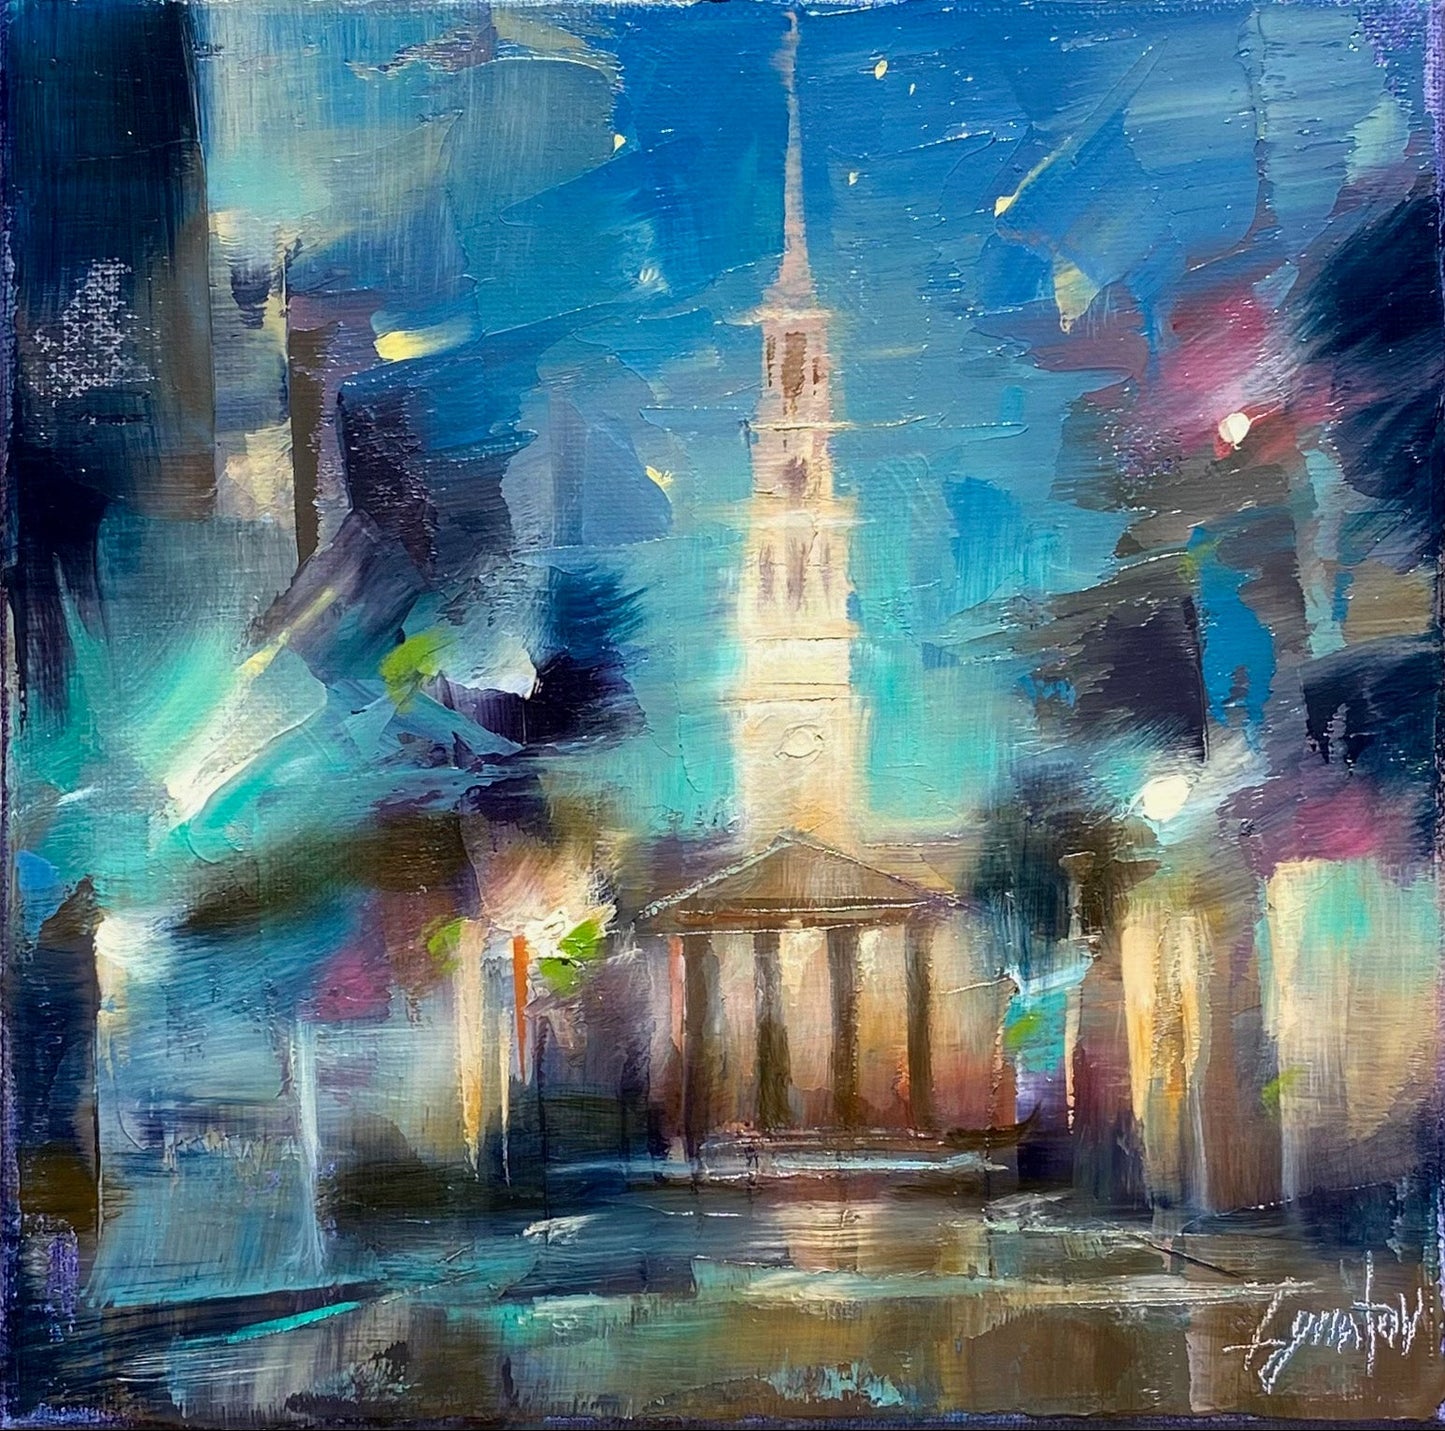 Nocturne St. Phillips Study by Ignat Ignatov at LePrince Galleries